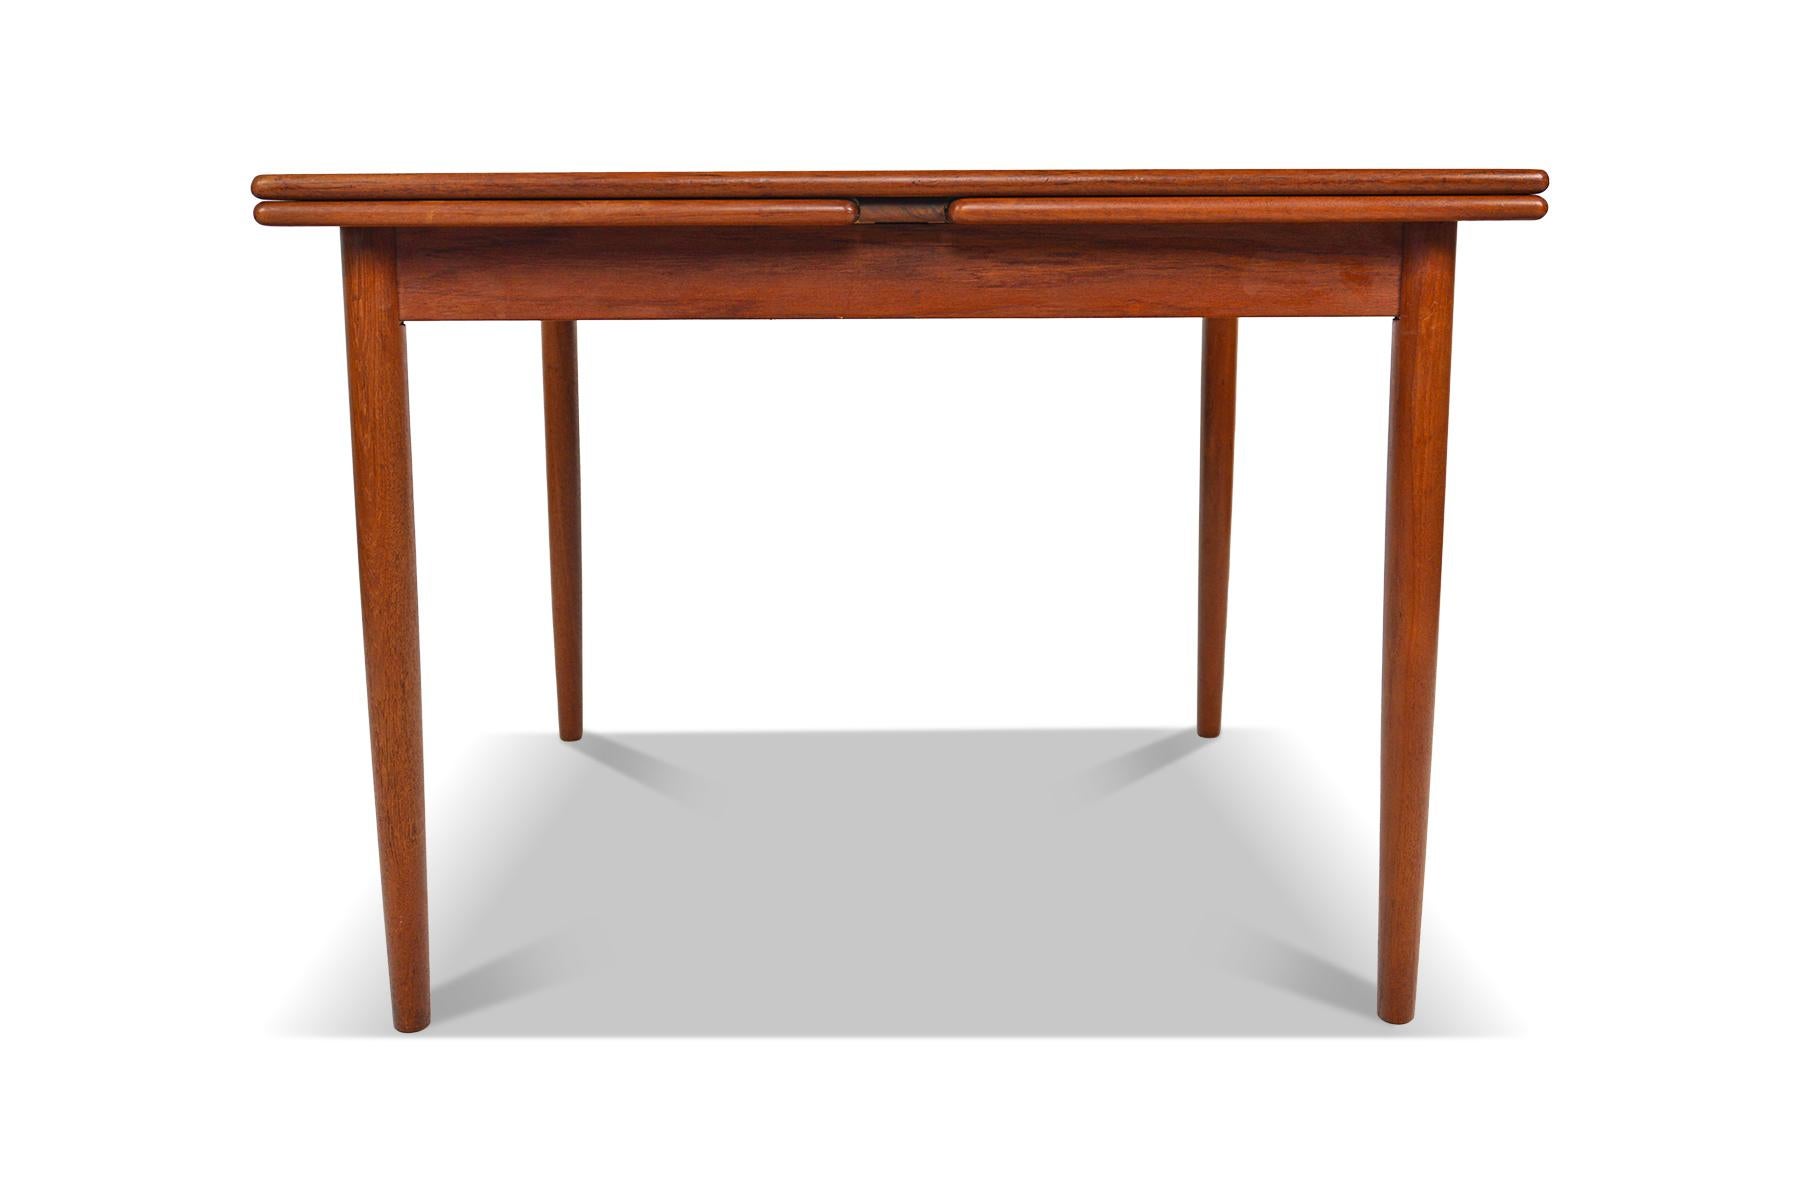 This Danish modern square teak dining table offers draw leaf extensions which nearly double its size for company. In excellent original condition.

Measurements (closed):
39.5? long x 39.5? wide x 29? tall
Expanded 76.5? long x 39.5? wide x 29?